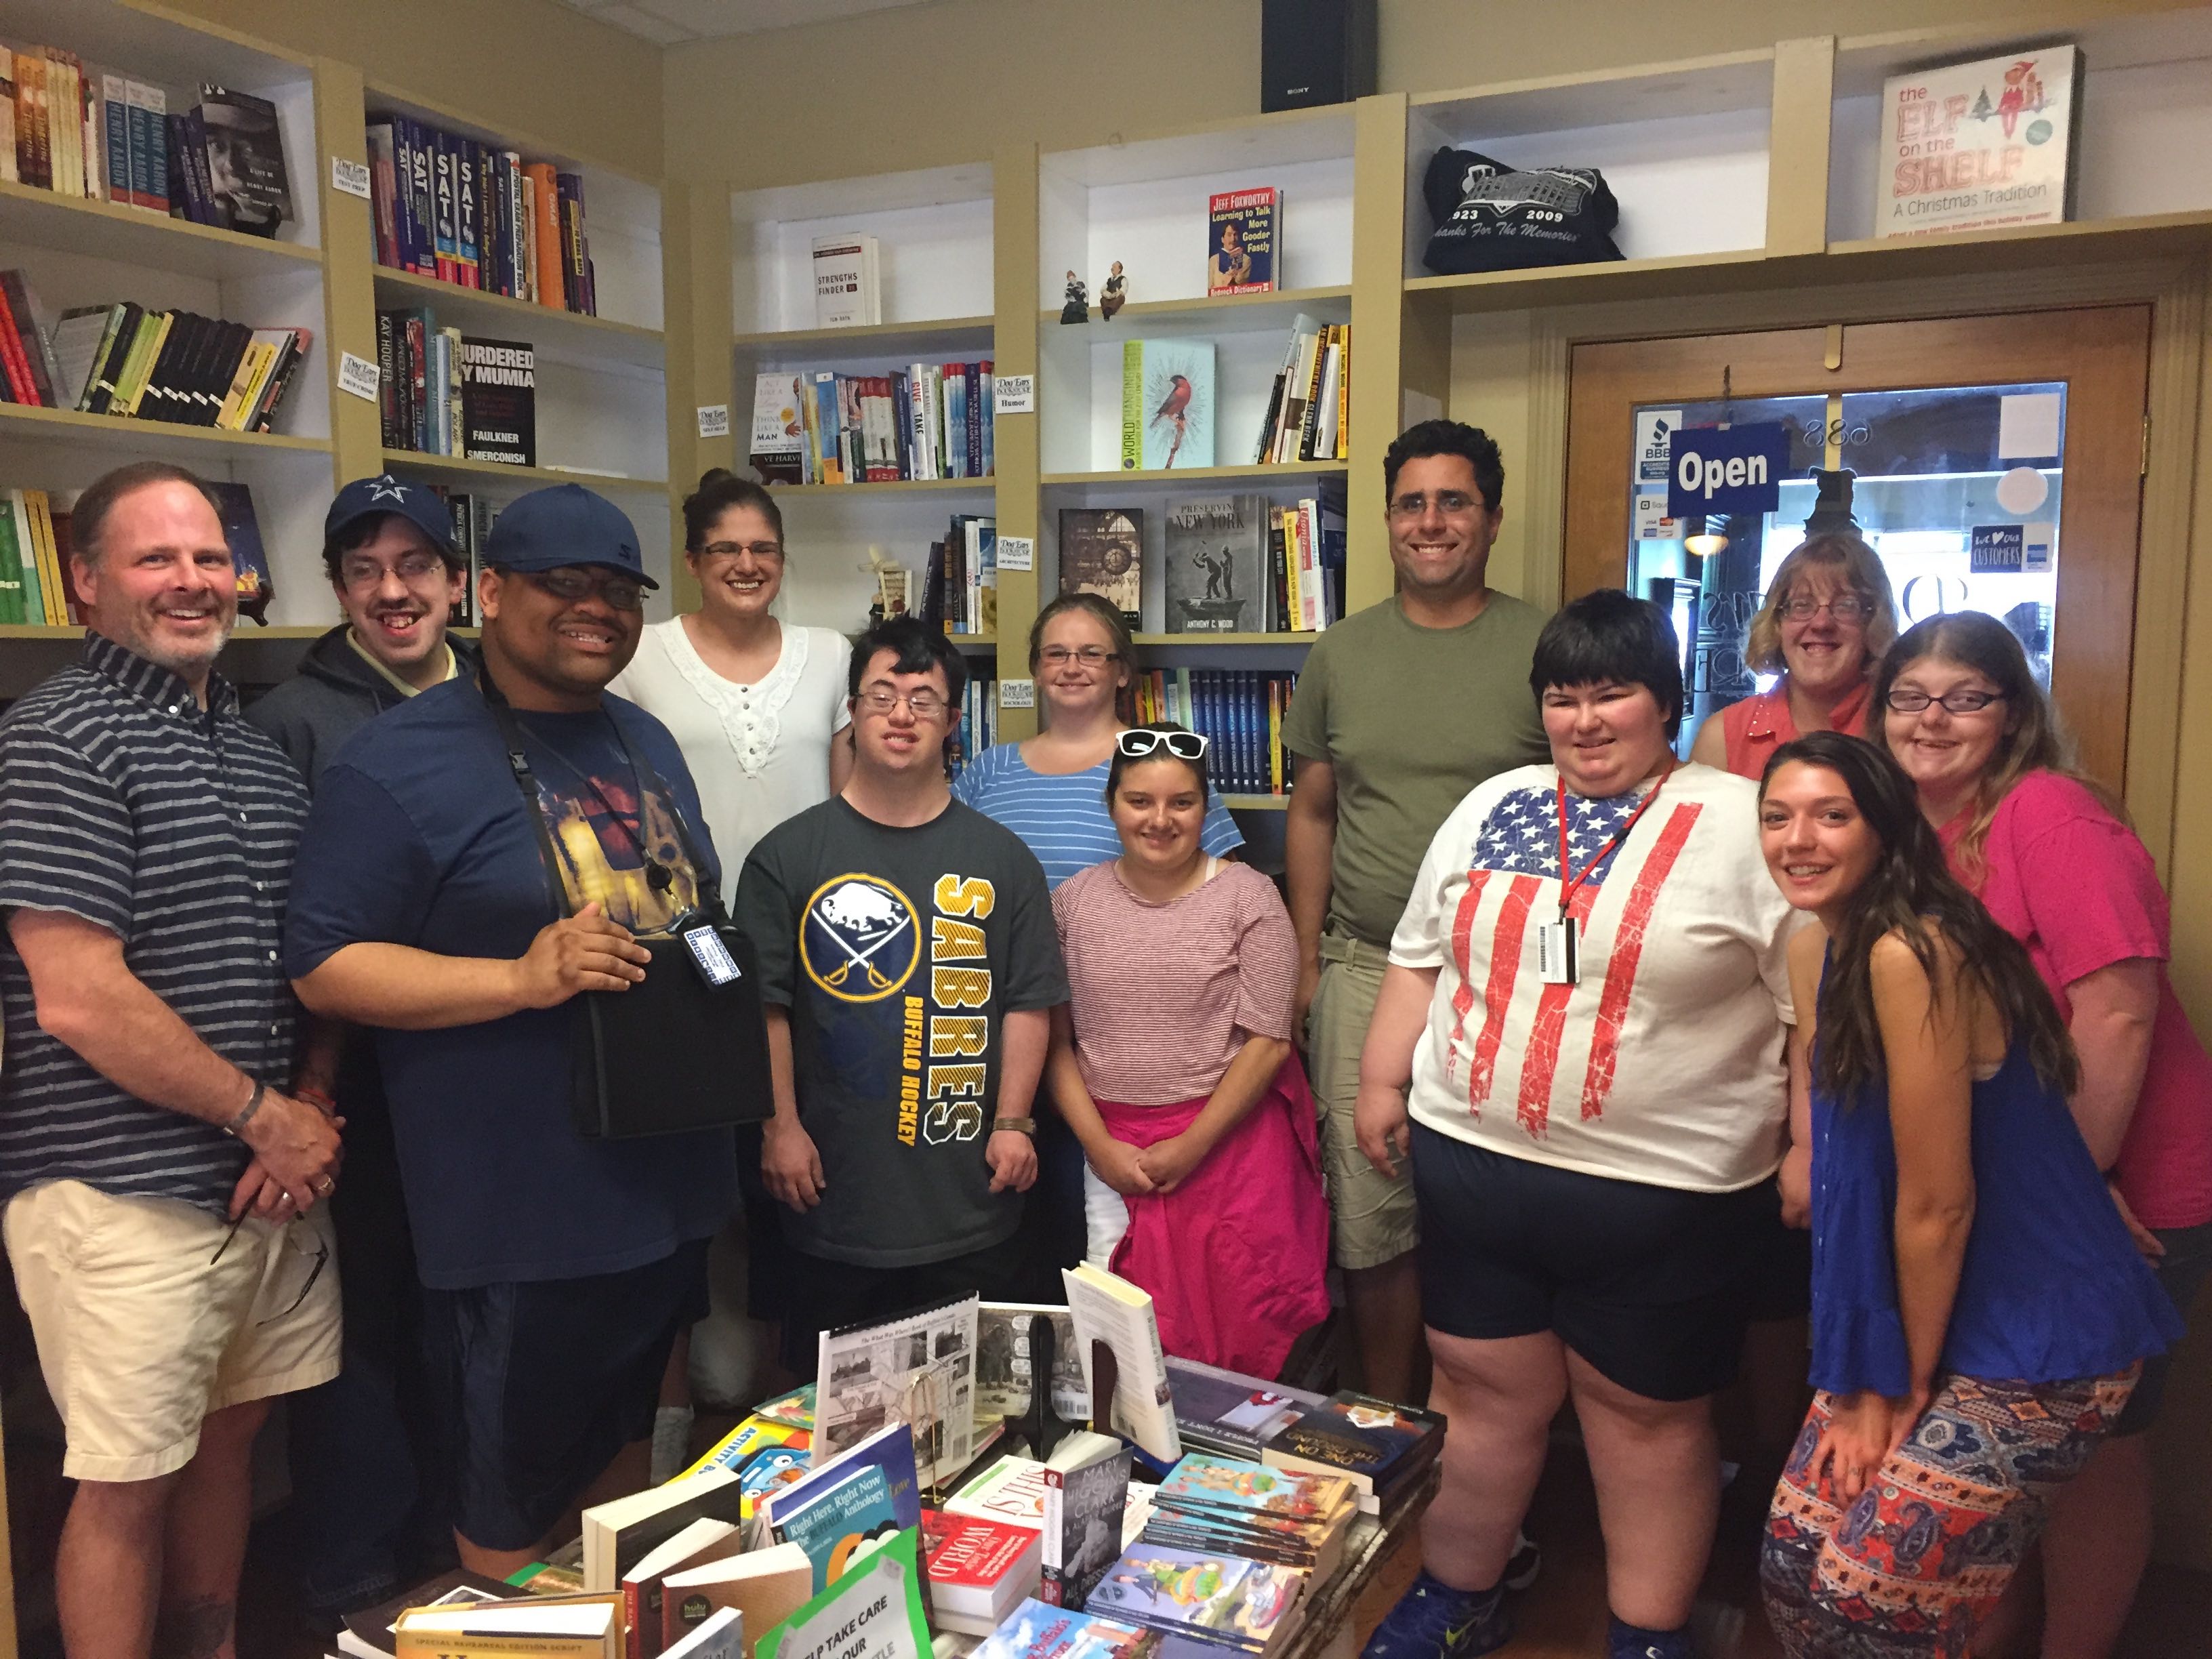 Dog Ears Bookstore partners with People Inc. on reading initiative